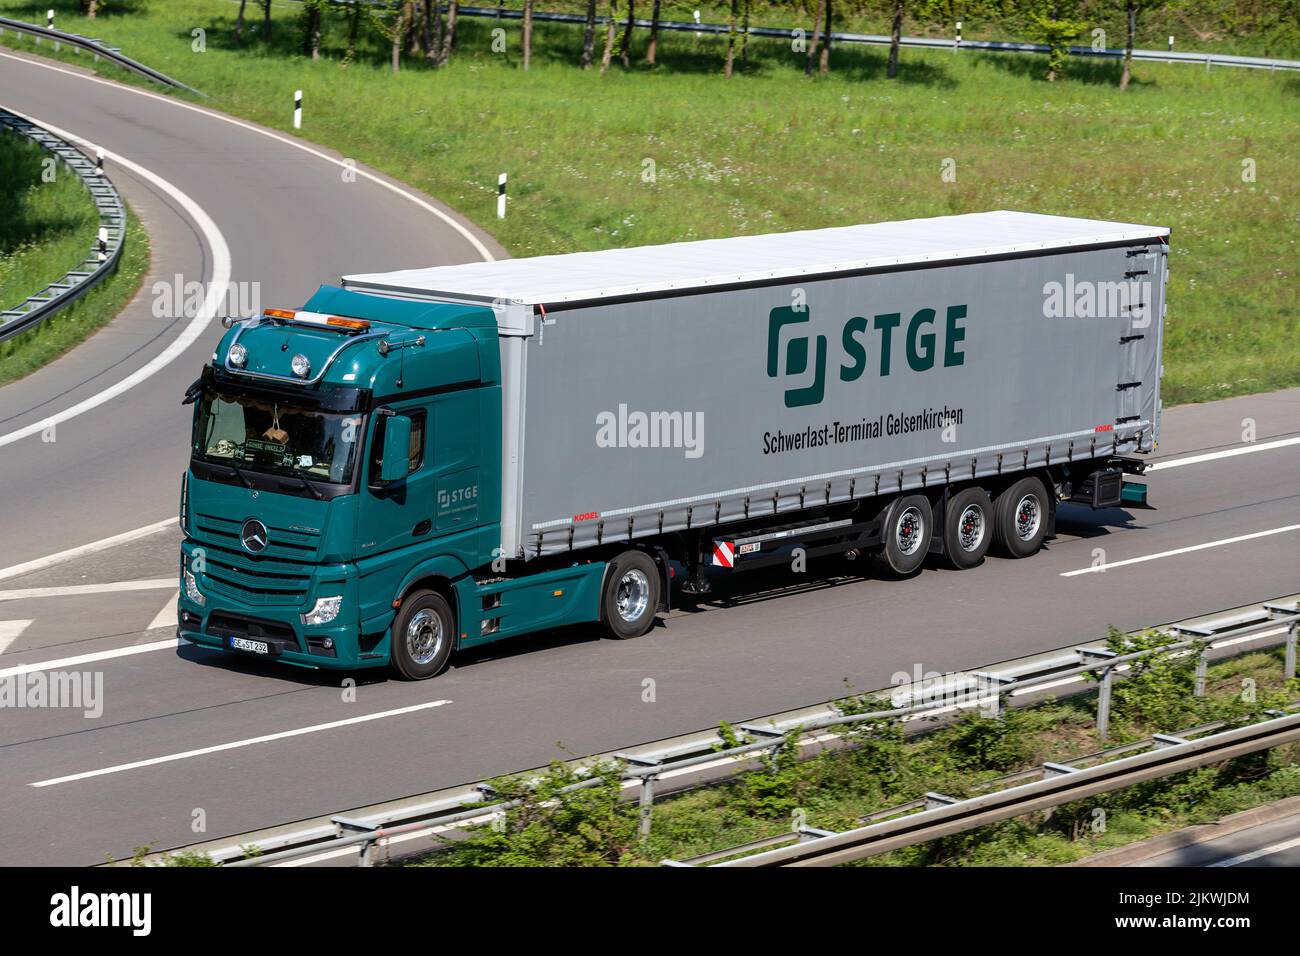 STGE Mercedes-Benz Actros truck with curtainside trailer on motorway Stock Photo